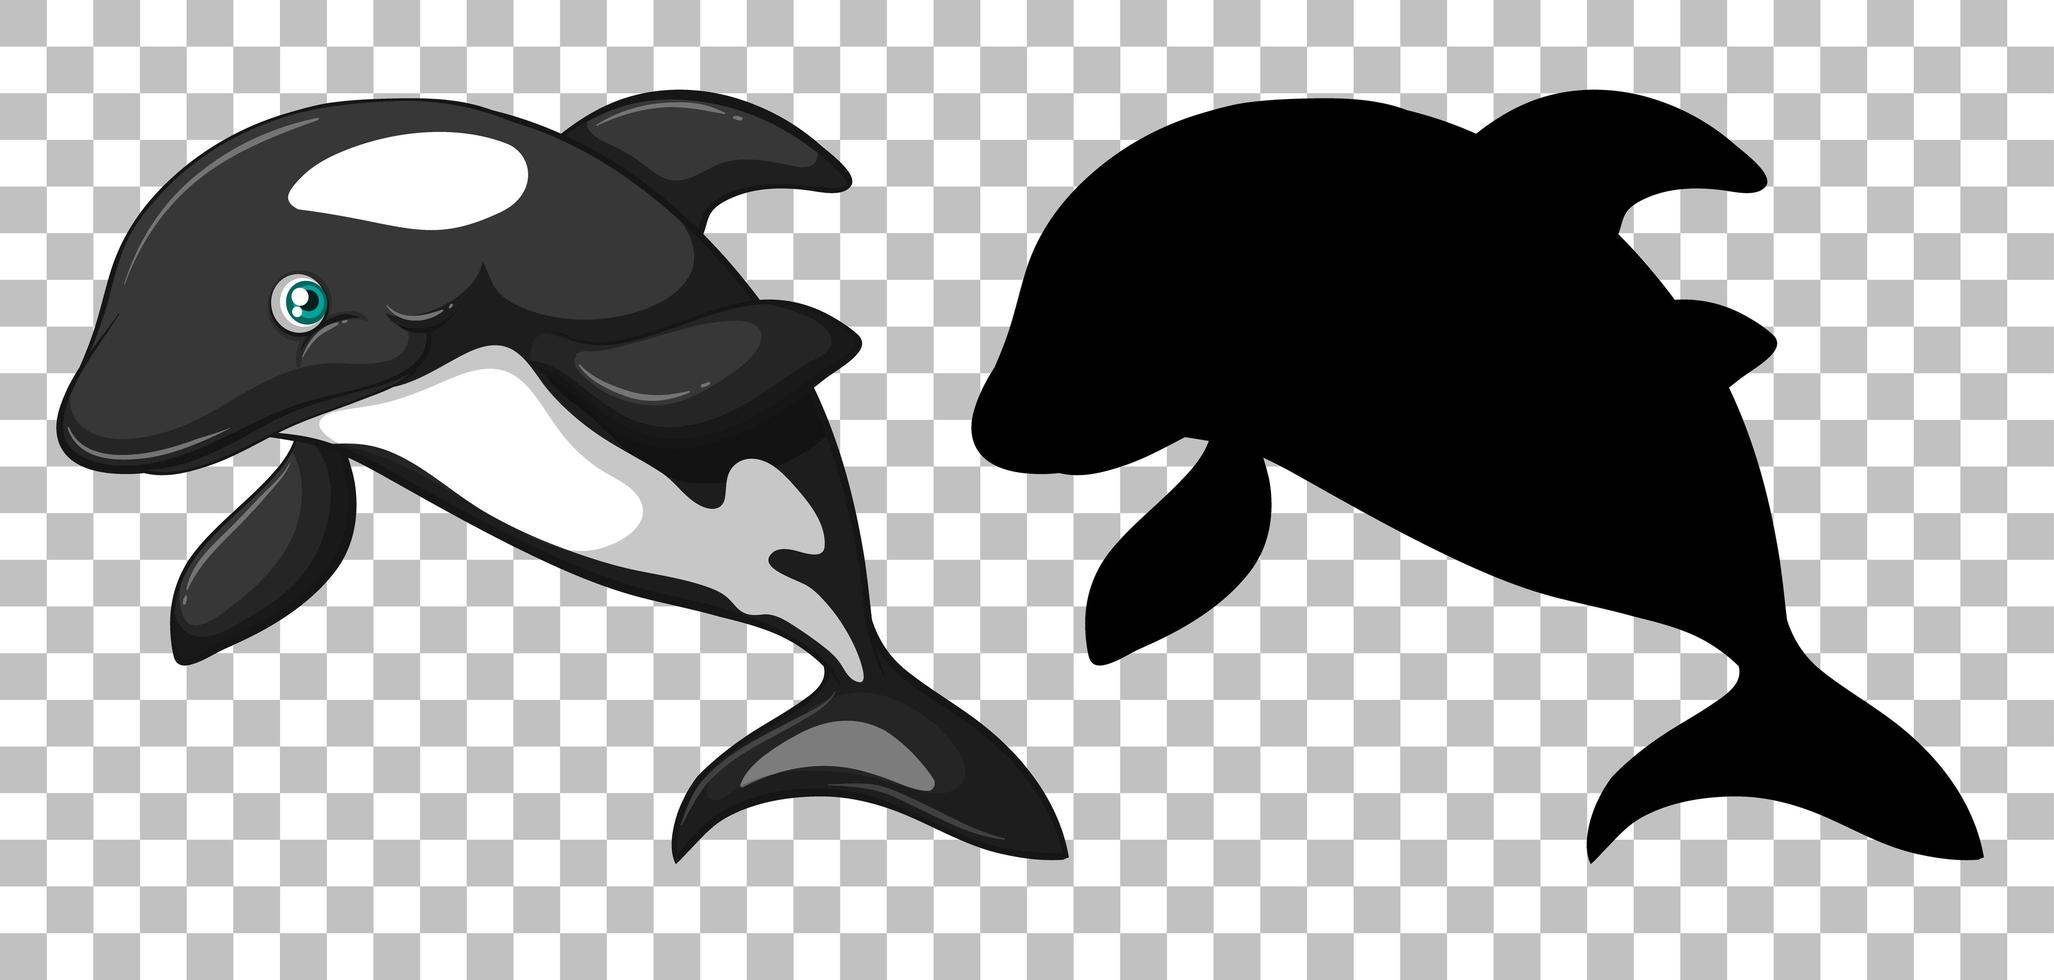 Cute orca whale and its silhouette vector